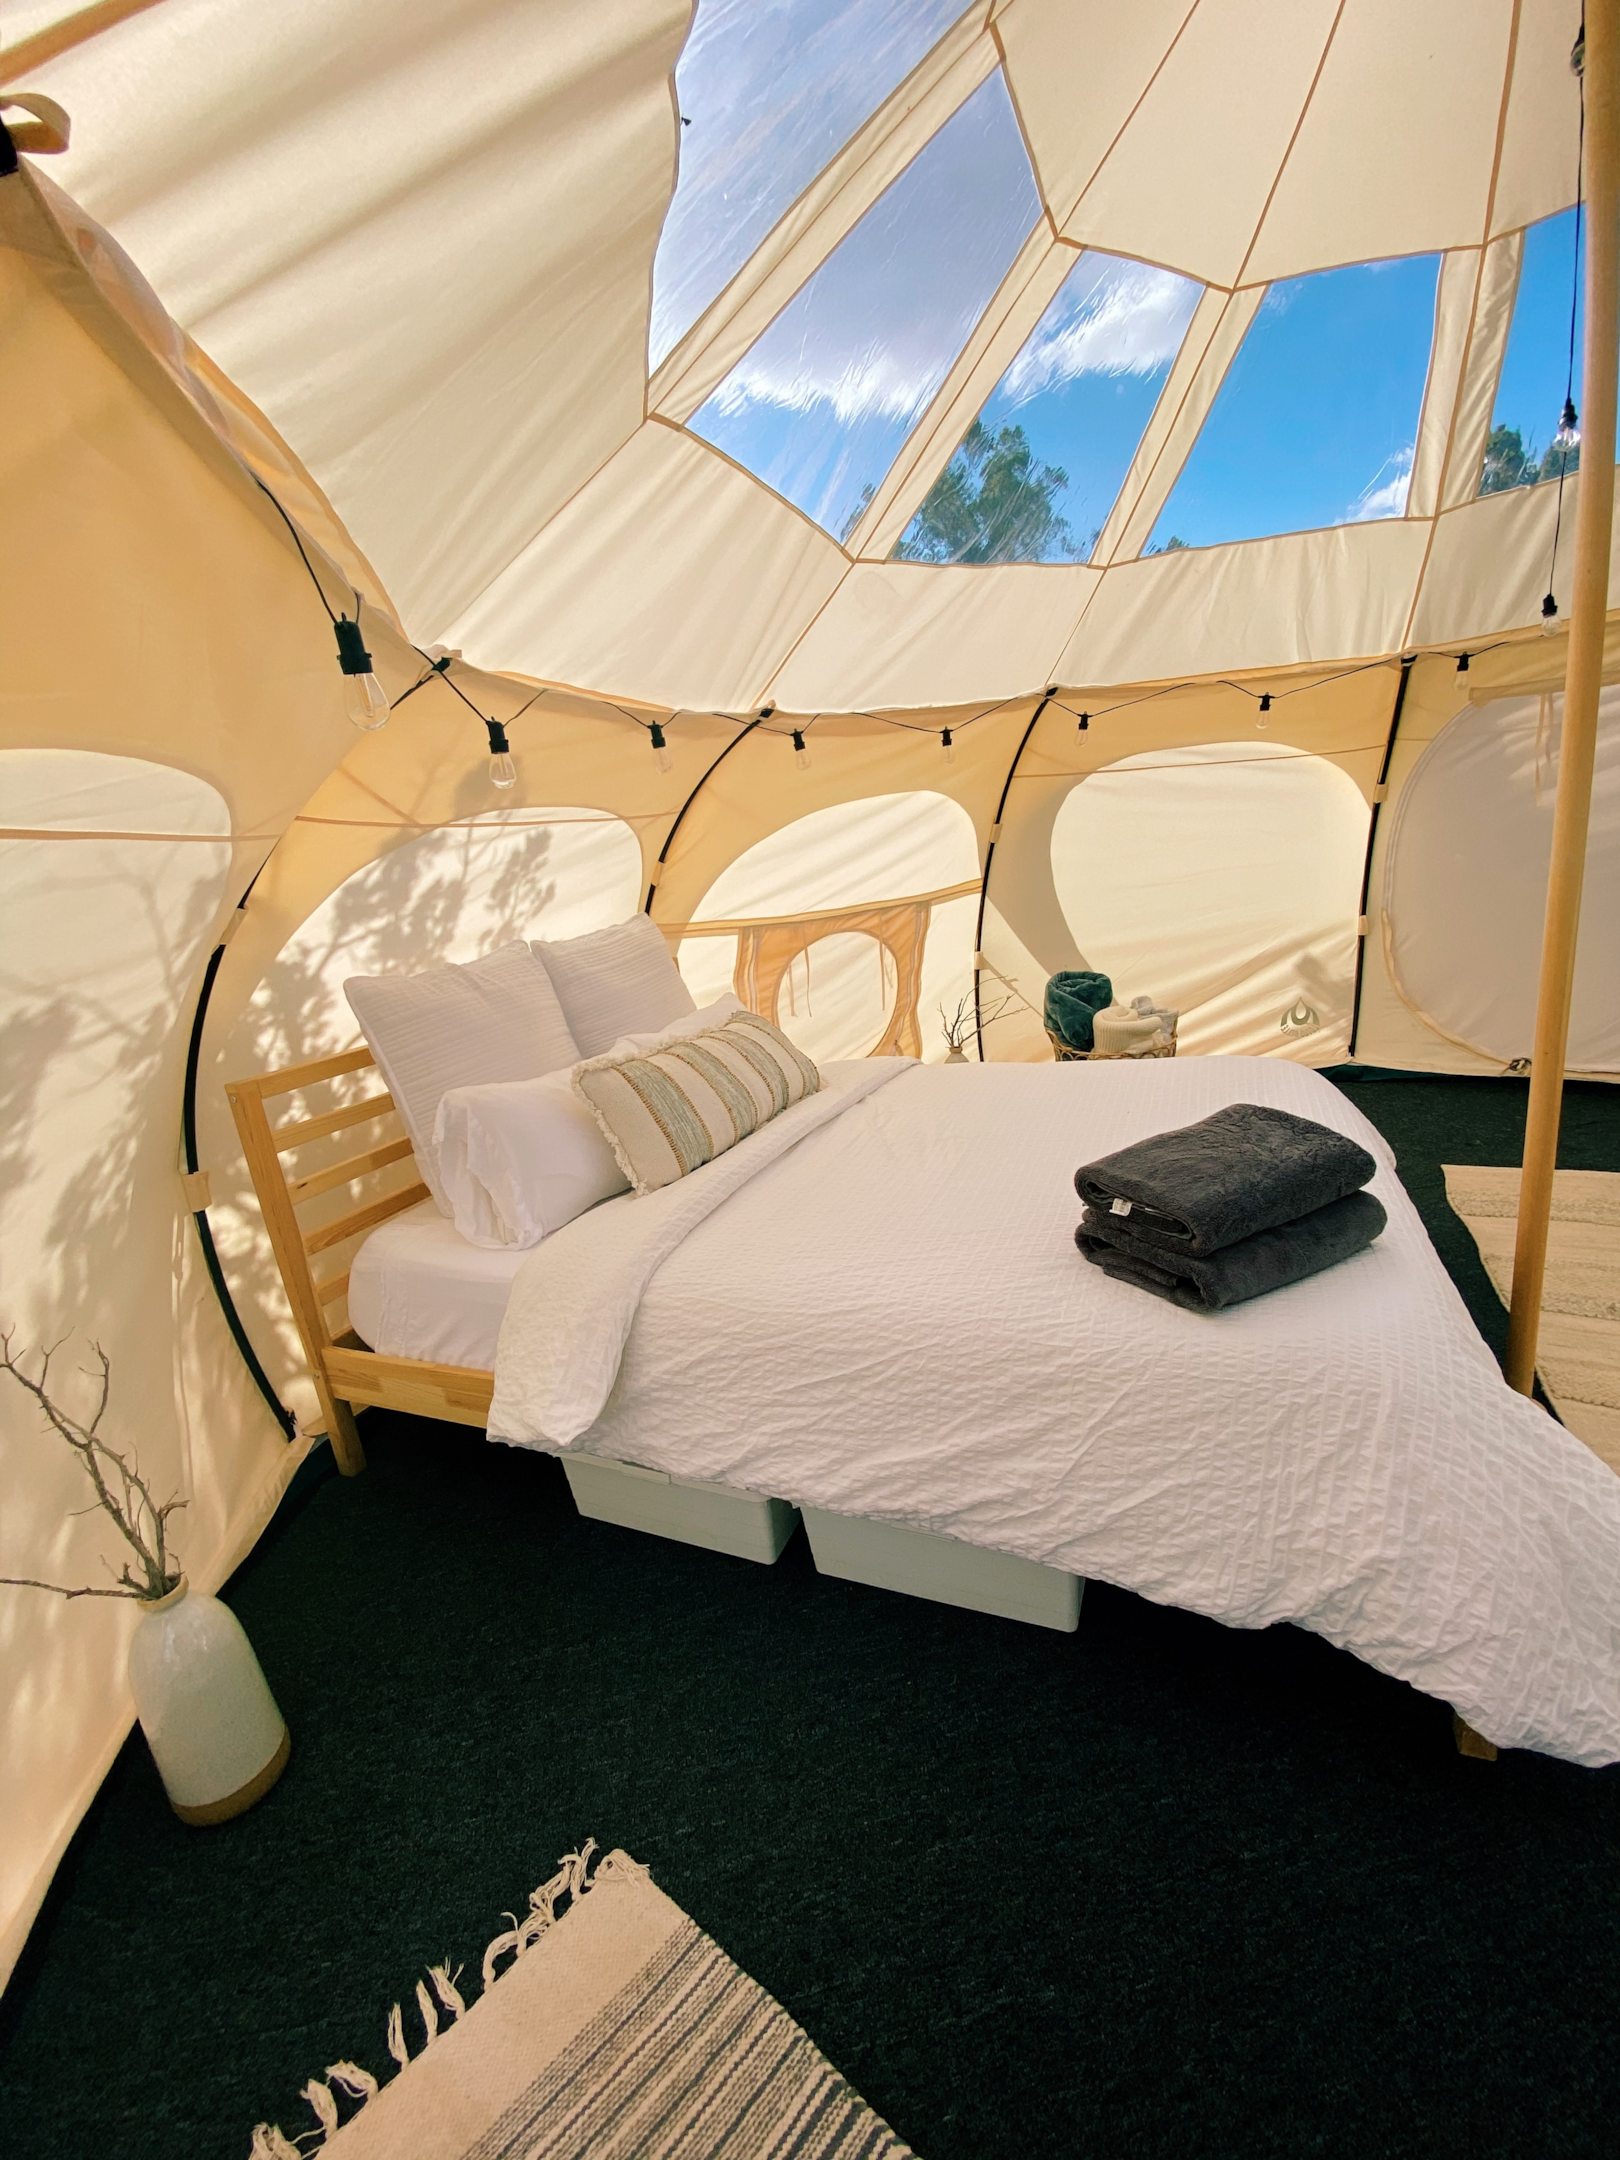 A modern yurt with wooden poles and an outer layer of felt